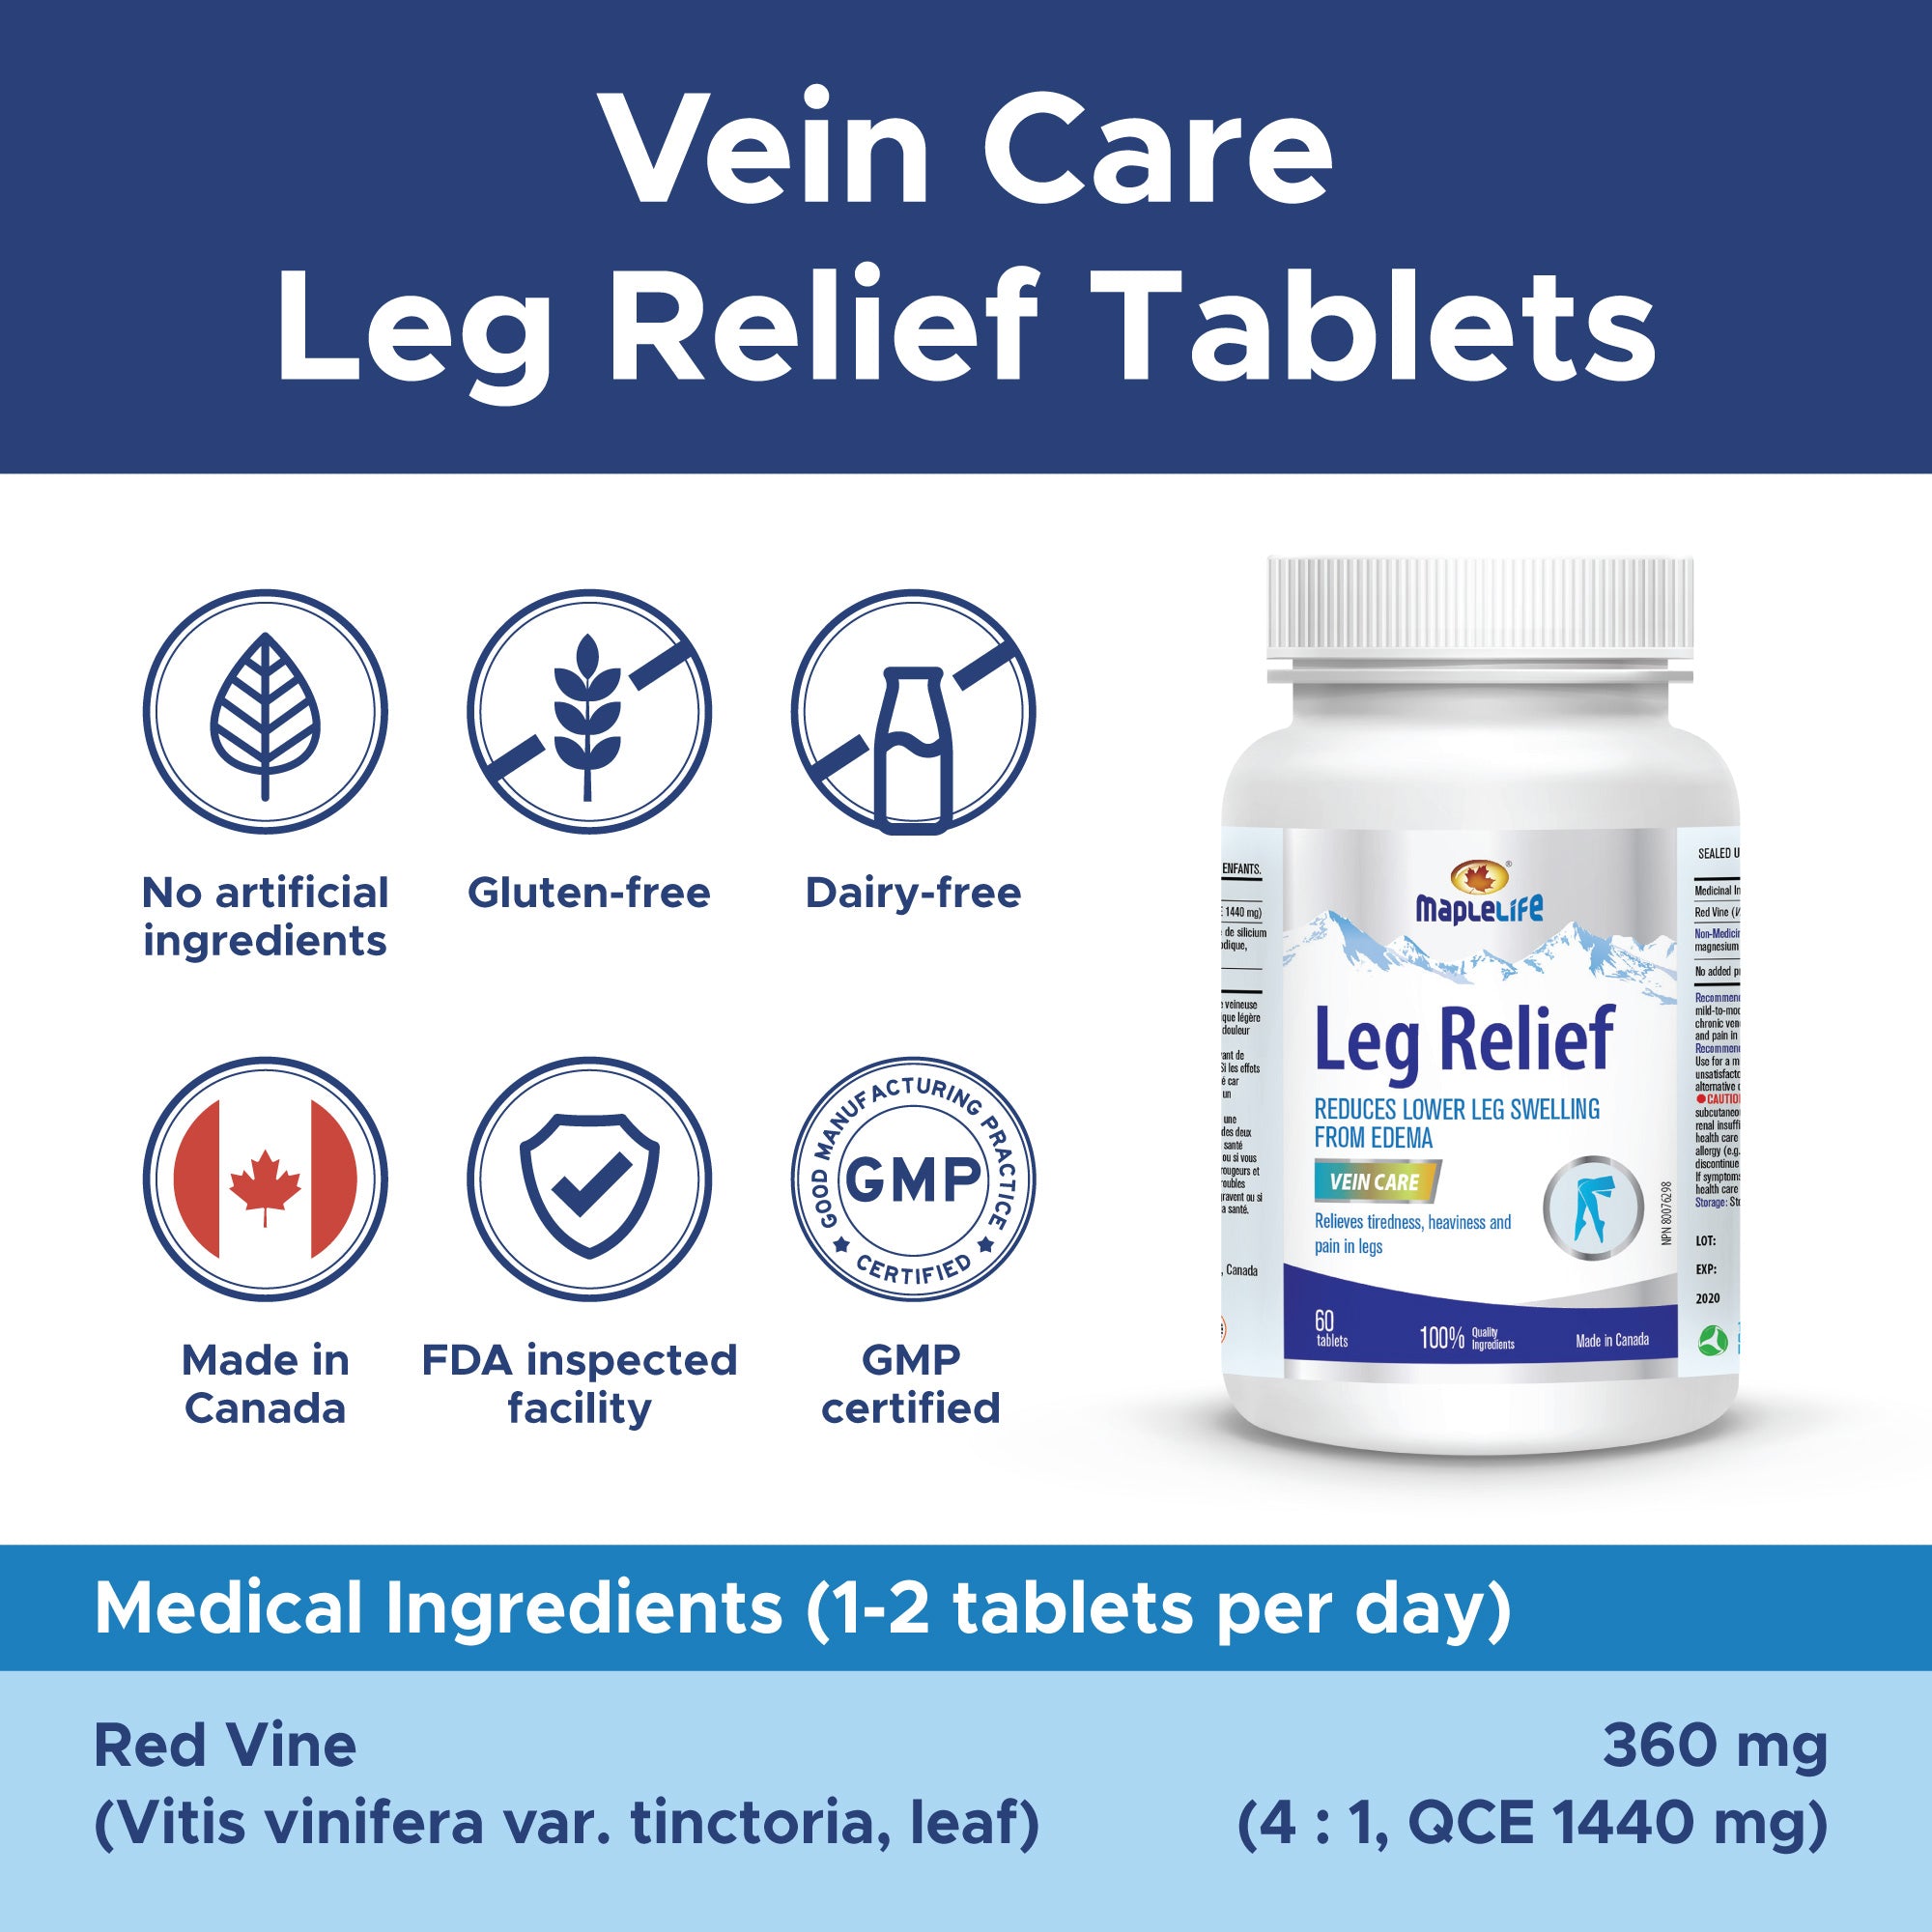 Leg Relief 60 Tablets